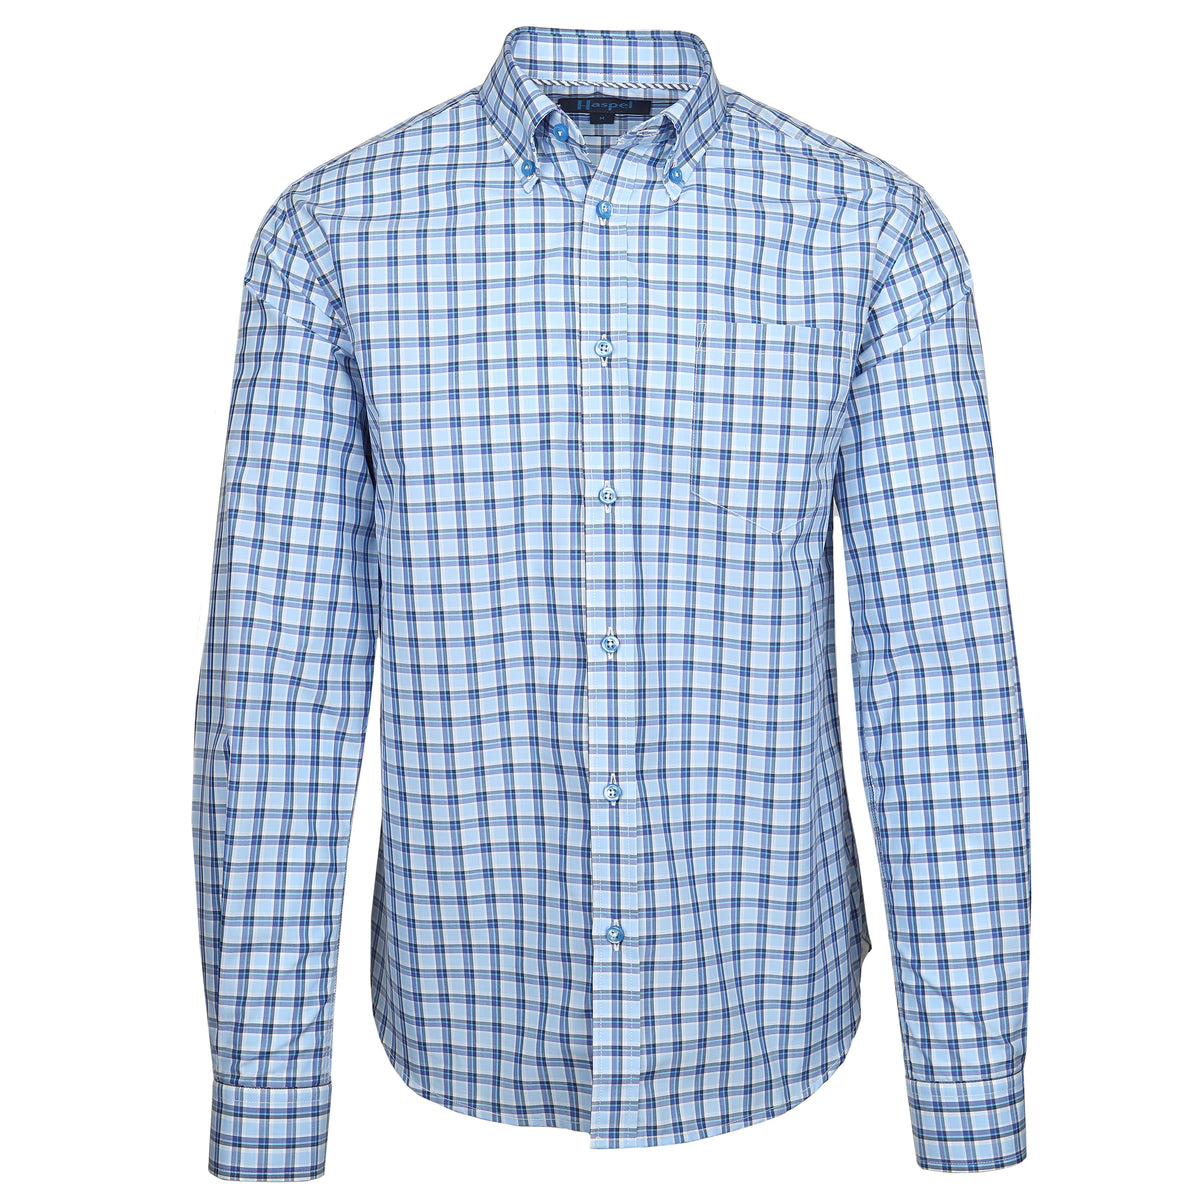 Enjoy the luxury of 100% cotton, Italian made quality, and bold navy &amp; light blue plaid.  100% Cotton • Button Down Collar • Long Sleeve • Contrast Buttons • Chest Pocket • Machine Washable • Made in Italy Enjoy the luxury of 100% cotton, Italian made quality, and bold navy &amp; light blue plaid.  100% Cotton • Button Down Collar • Long Sleeve • Contrast Buttons • Chest Pocket • Machine Washable • Made in Italy